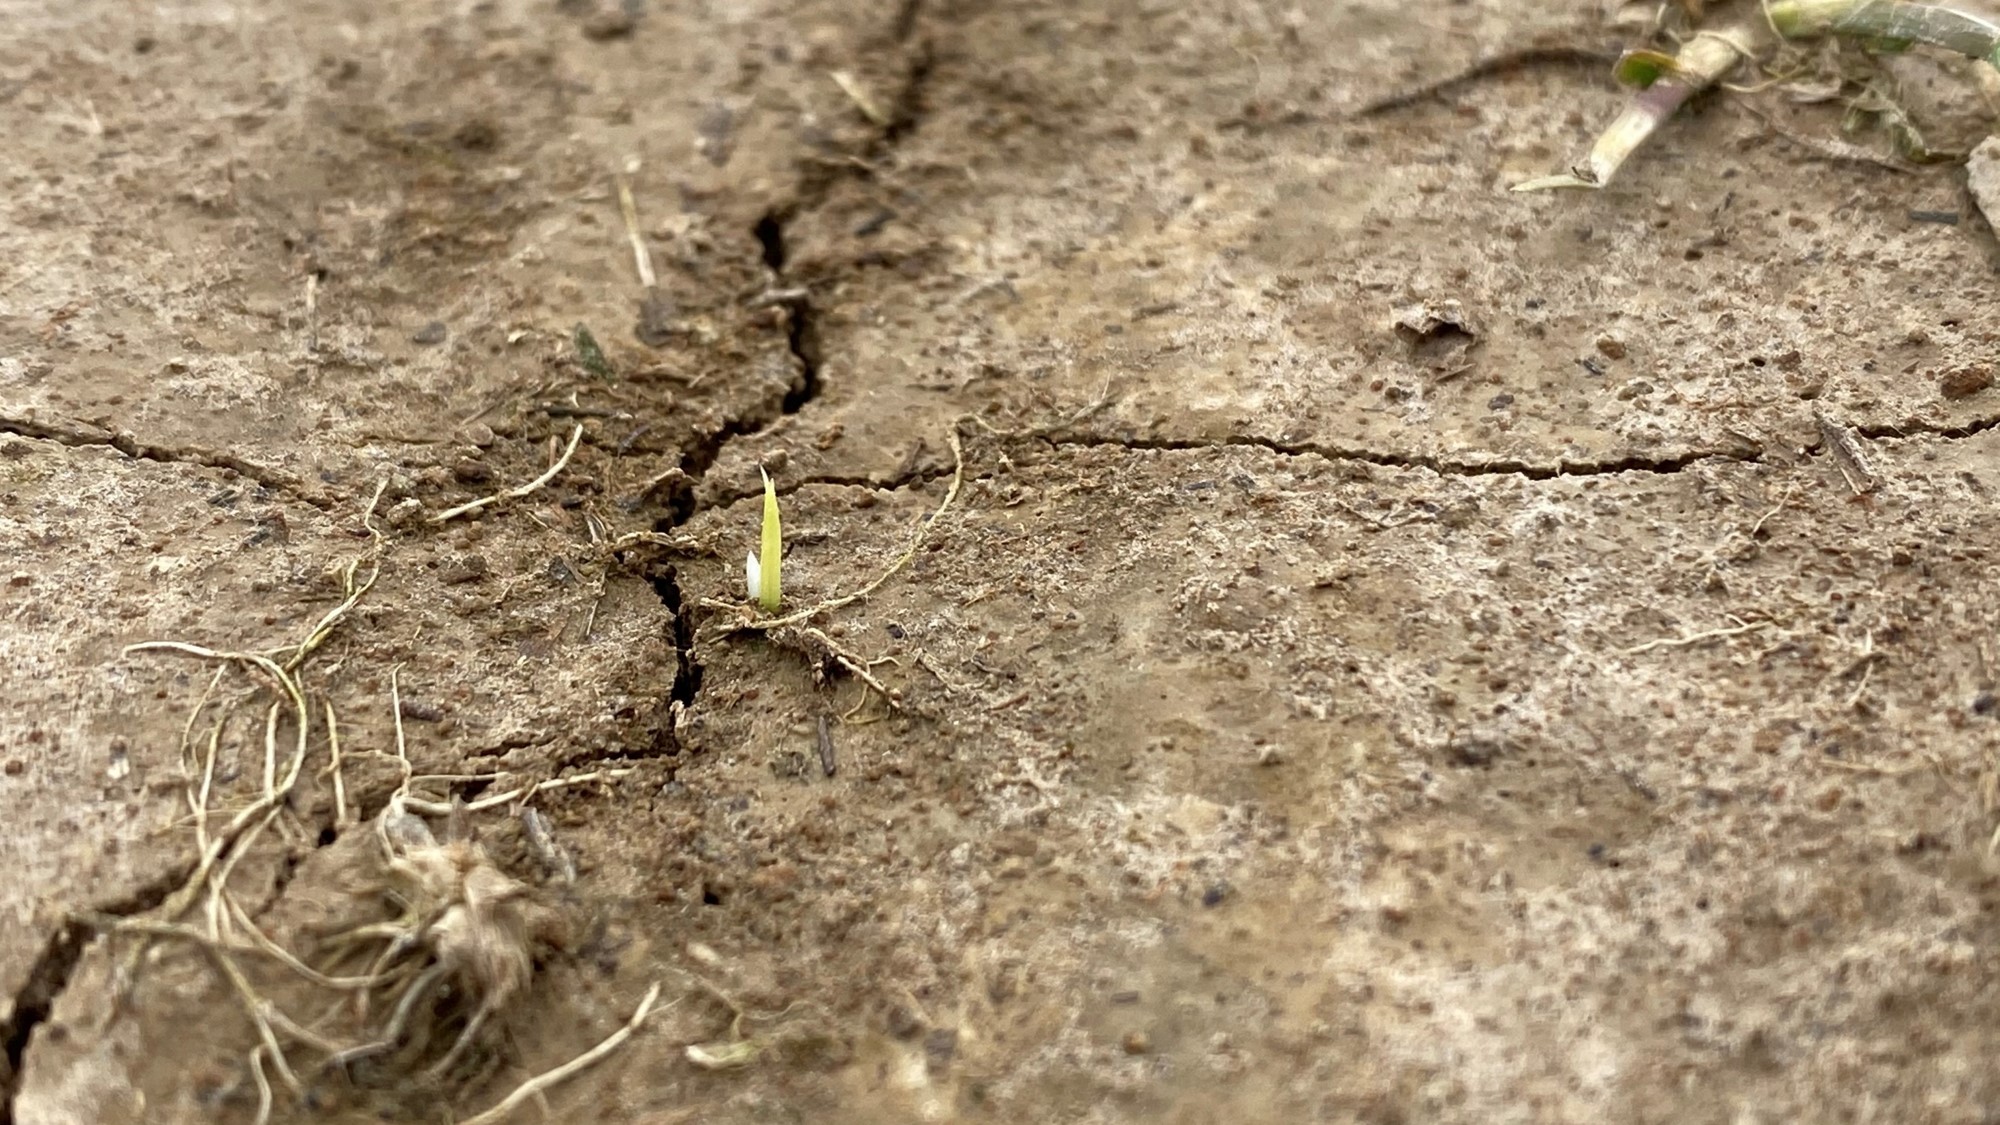 Rice seedling emerging from the soil in an Arkansas rice field